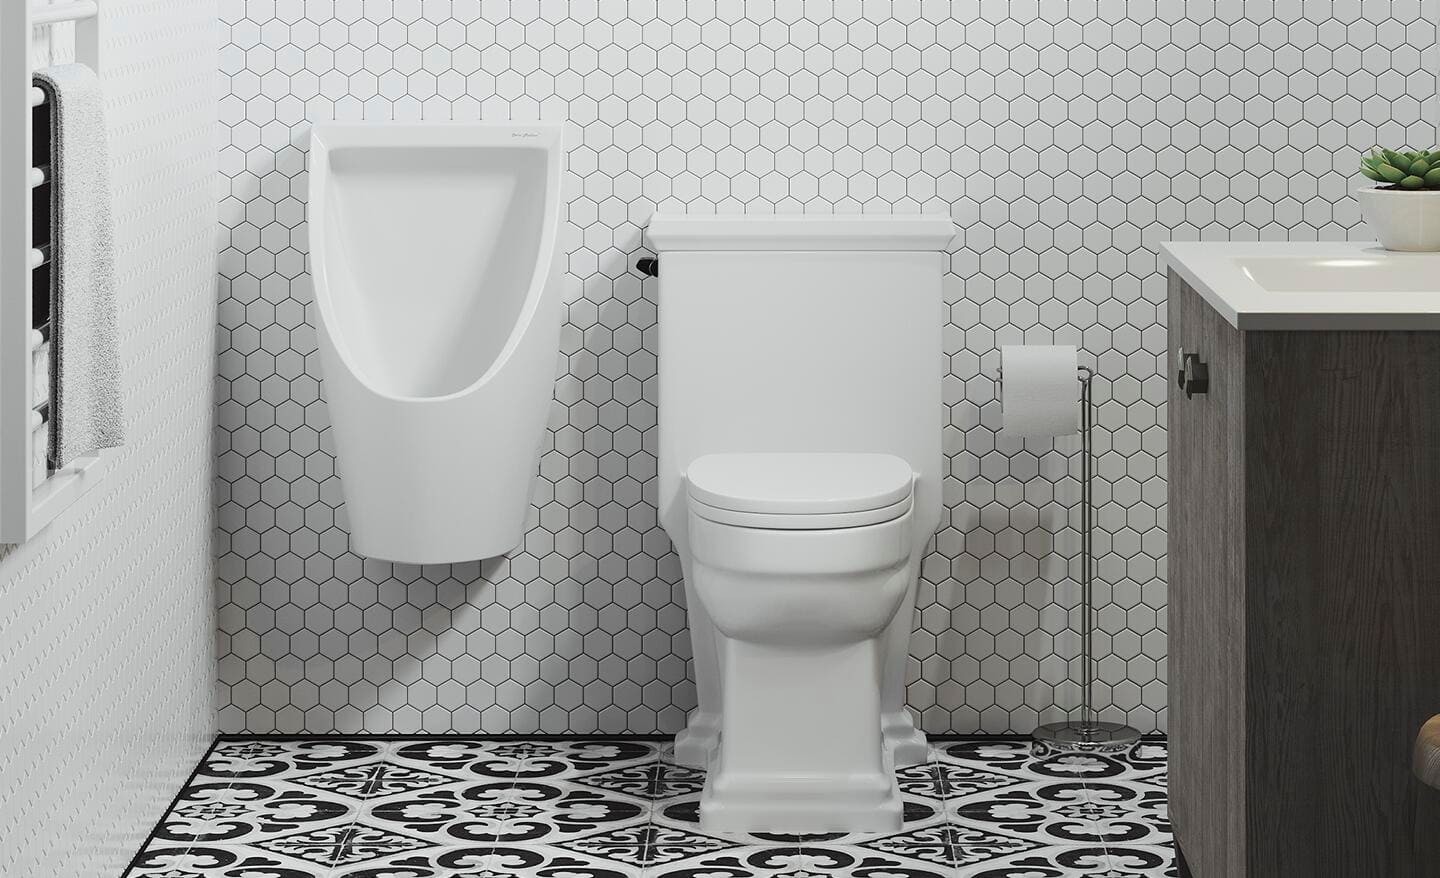 A white urinal installed next to a two-piece toilet.